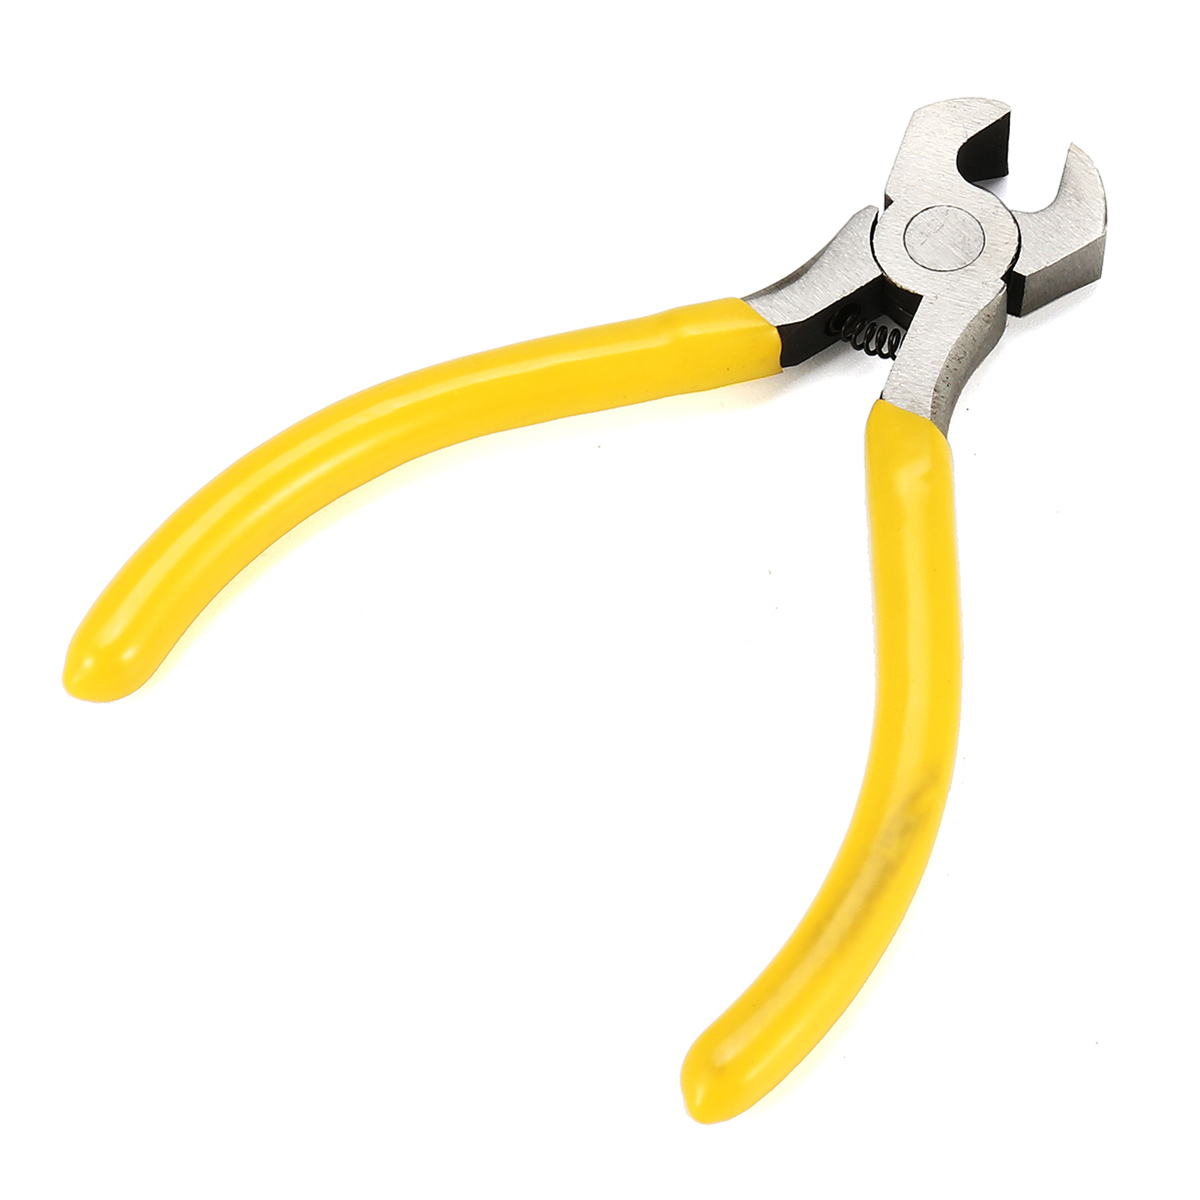 Guitar-Parts-Professional-Fret-Puller-Removal-Plier-Guitar-Bass-Repair-Tool-String-Pliers-Tool-1368383-5